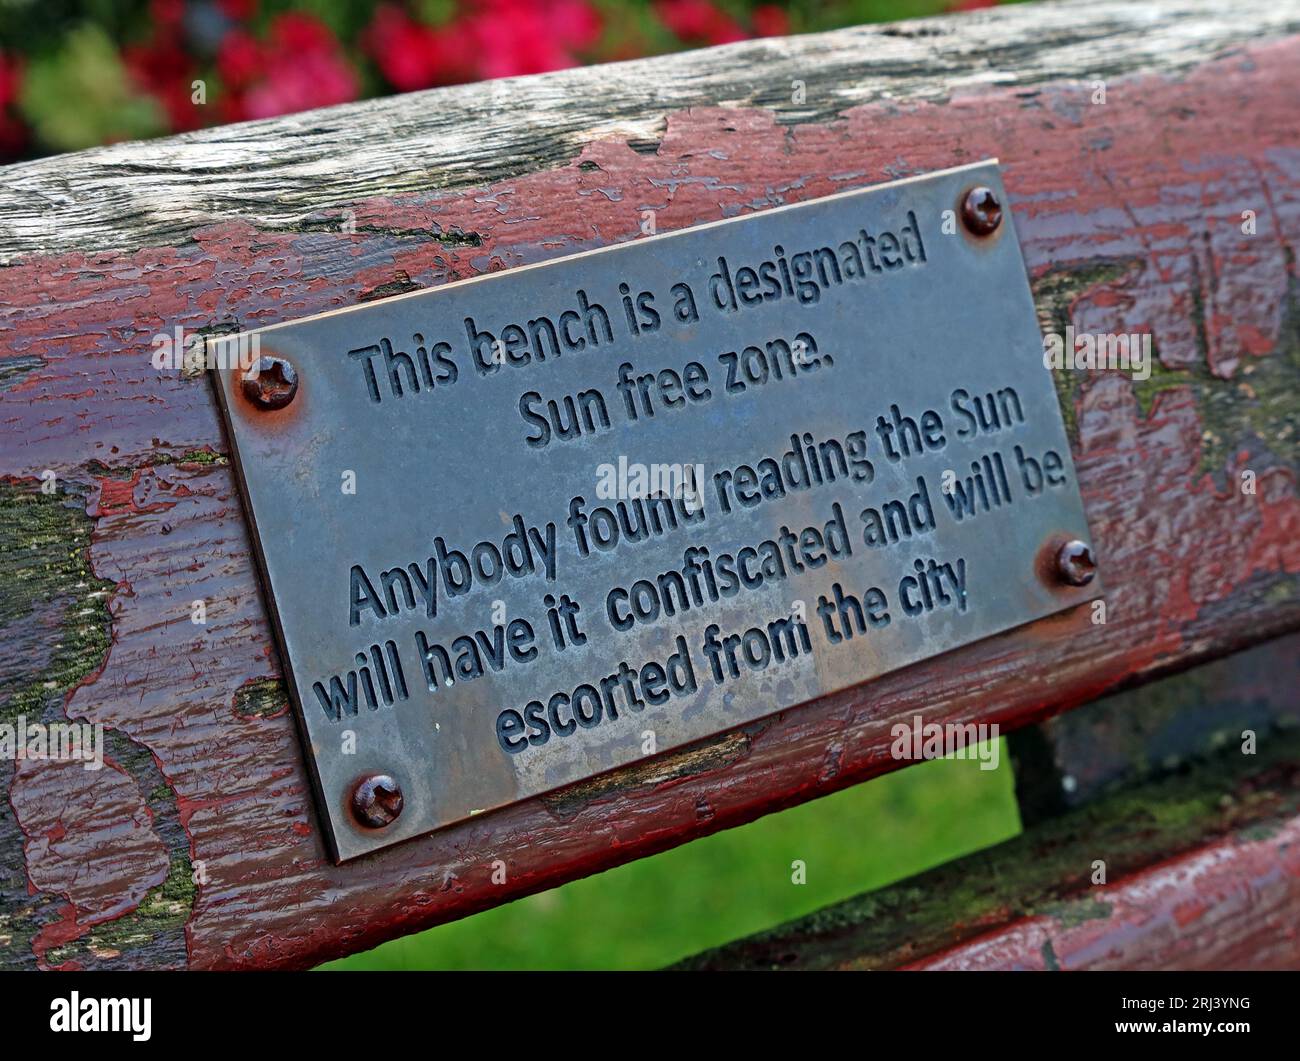 This bench is a designated Sun Free Zone - Anyone found reading The Sun, will have it confiscated and will be escorted from the city of Liverpool Stock Photo